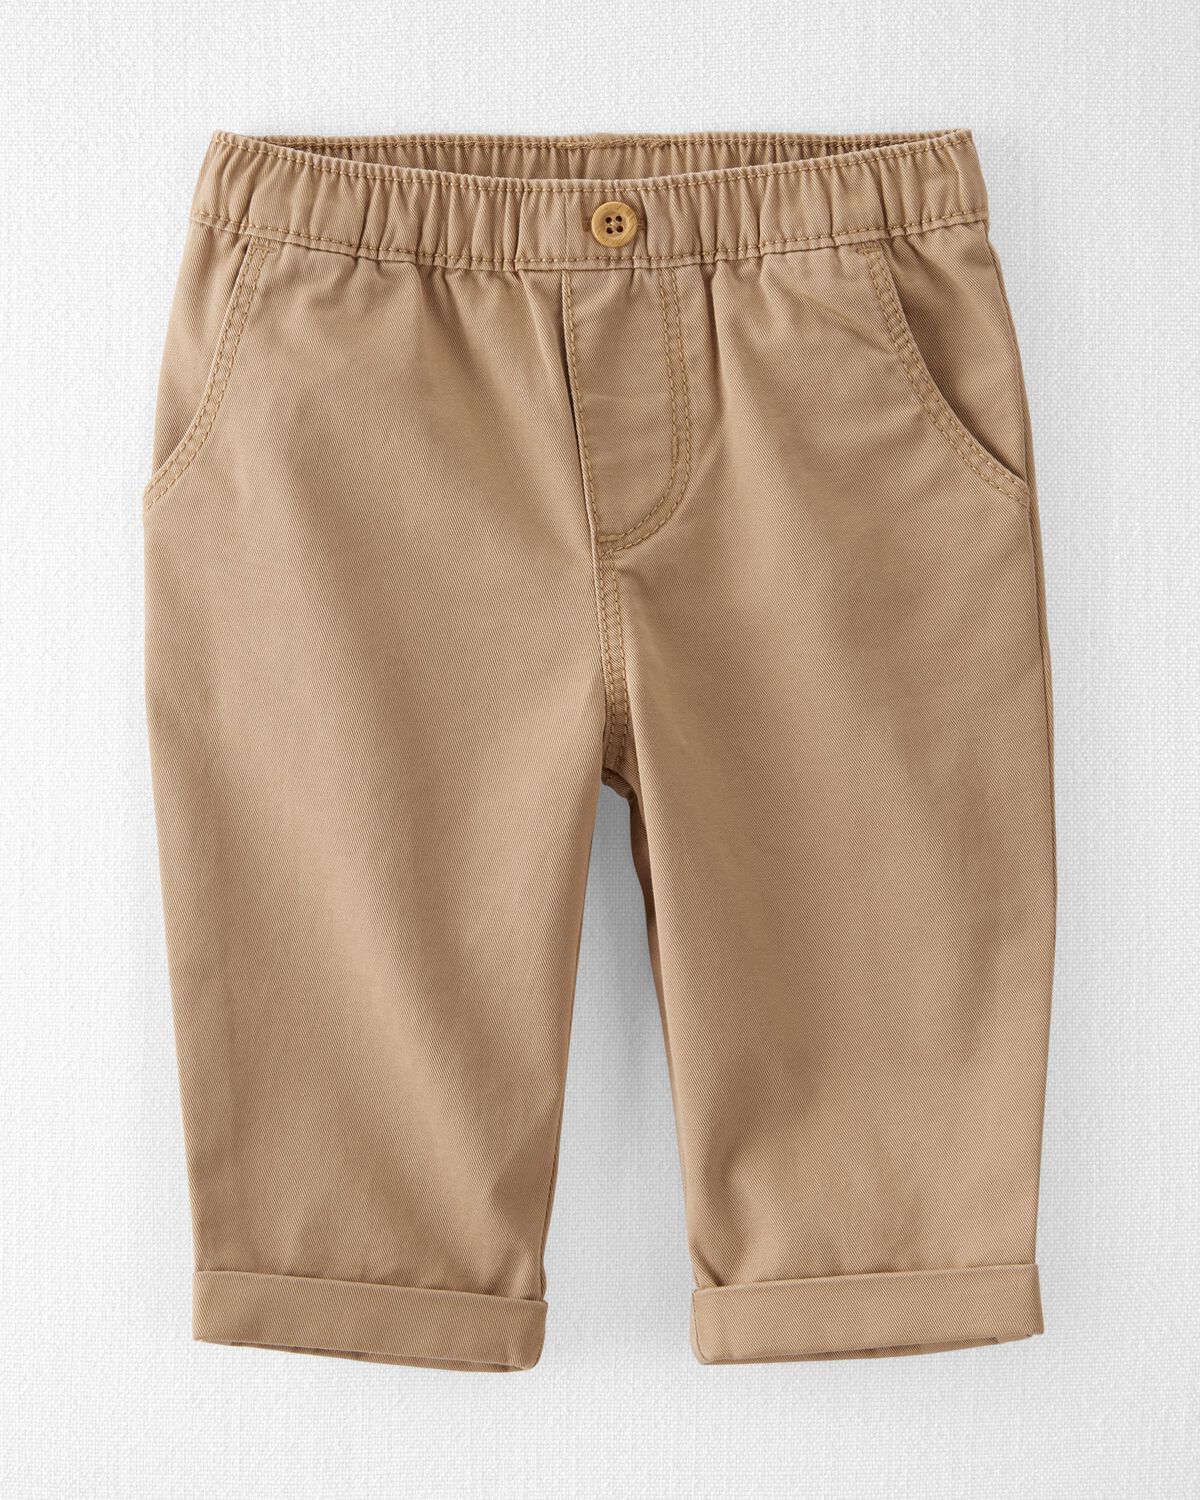 Taupe Baby Organic Cotton Twill Pants in Khaki | carters.com | Carter's